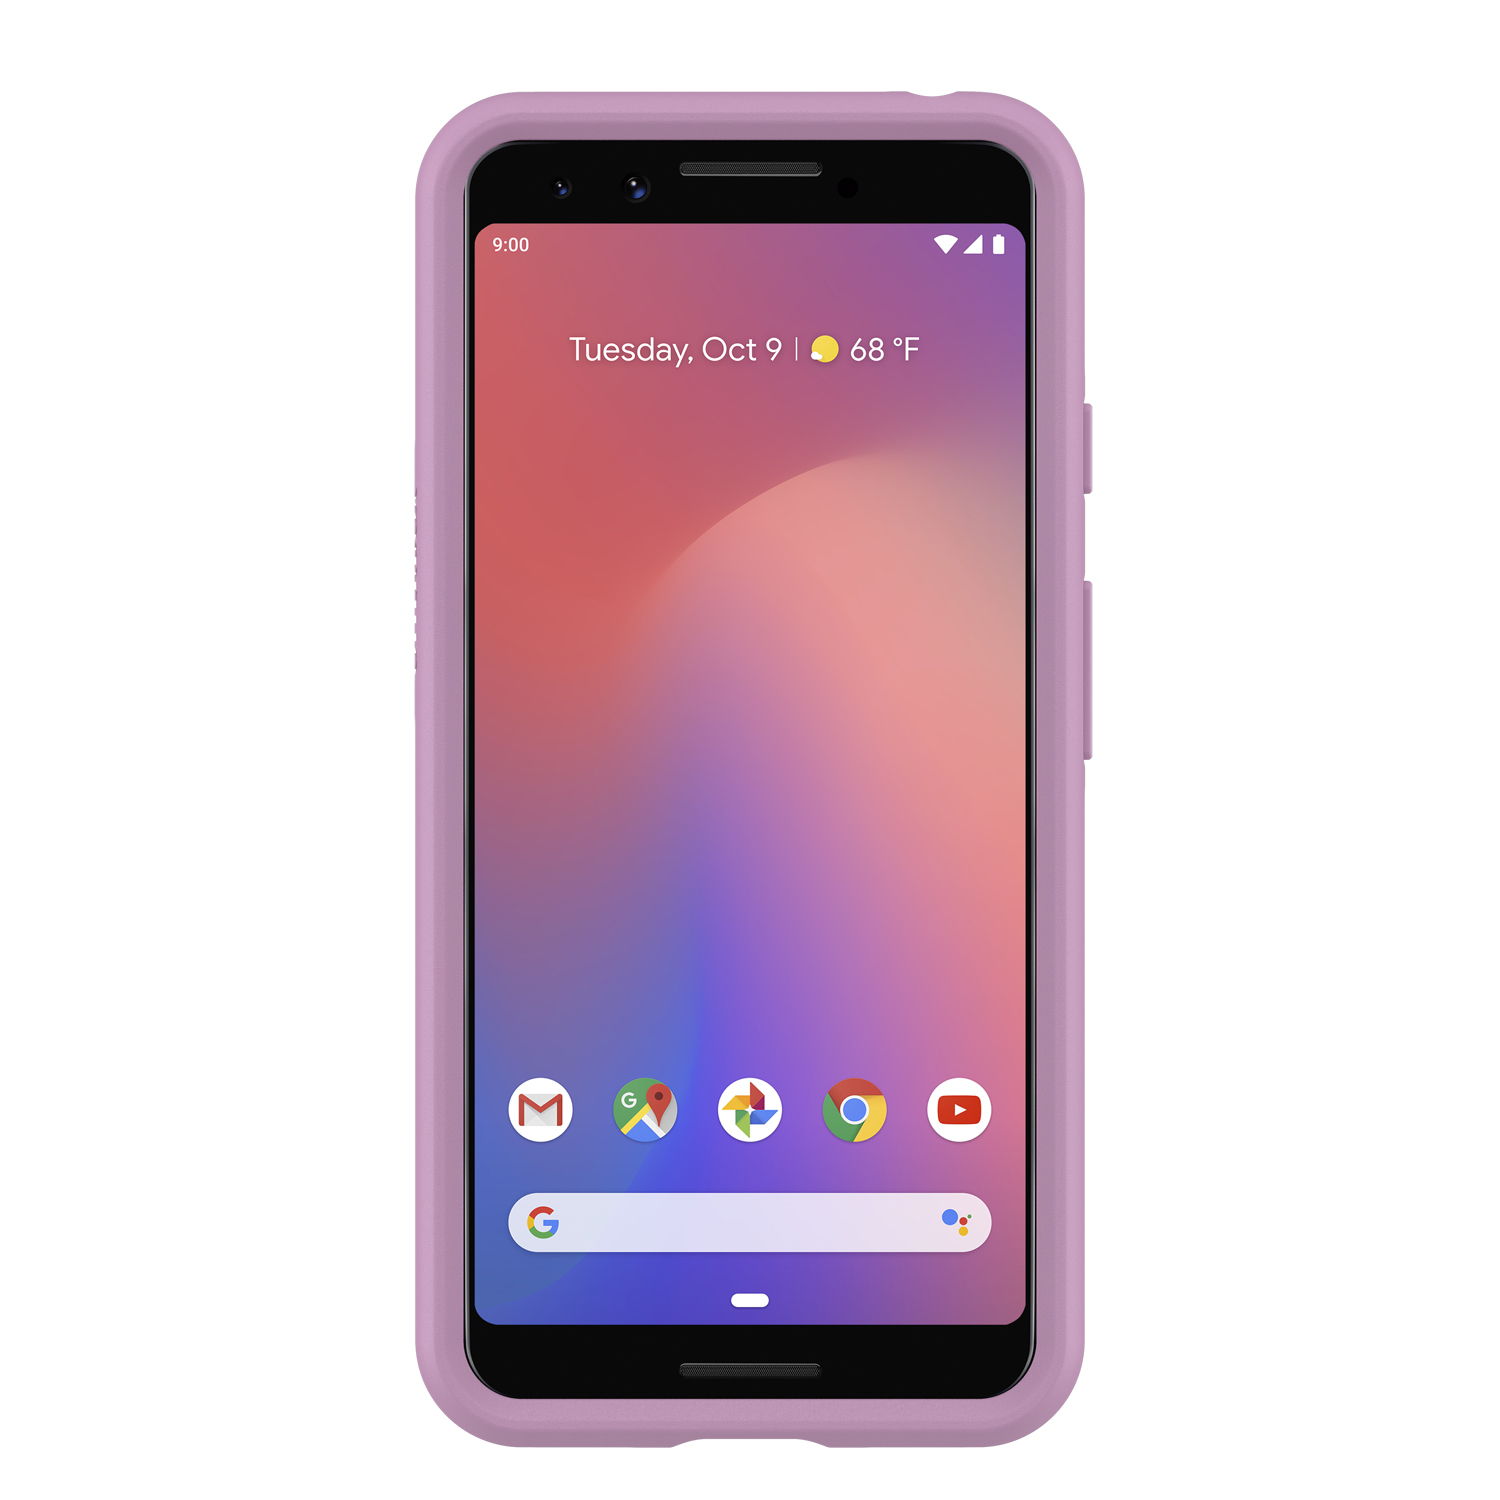 Otterbox Symmetry Series Case for Google Pixel 3, Tonic Violet - image 3 of 6